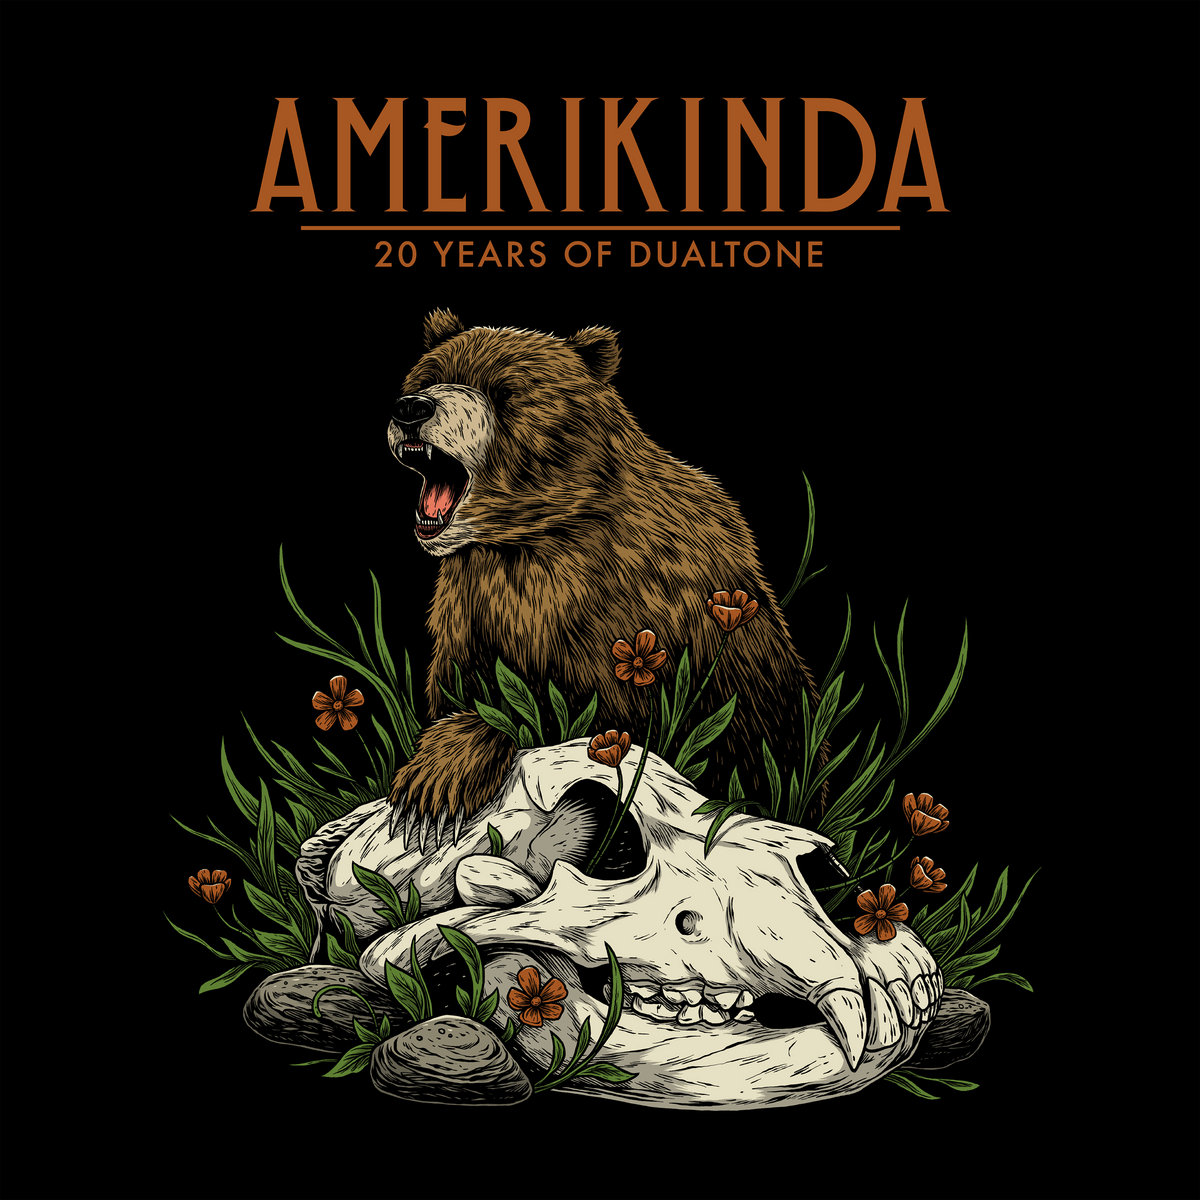 #5CoverSongsULove

To celebrate their 20th anniversary, indie label Dualtone put out Amerikinda, a collection of their artists covering each other's songs. A lot of great tracks here. My favorite is Gregory Alan Isakov covering the Lumineers: youtu.be/_IB3leHjnTE